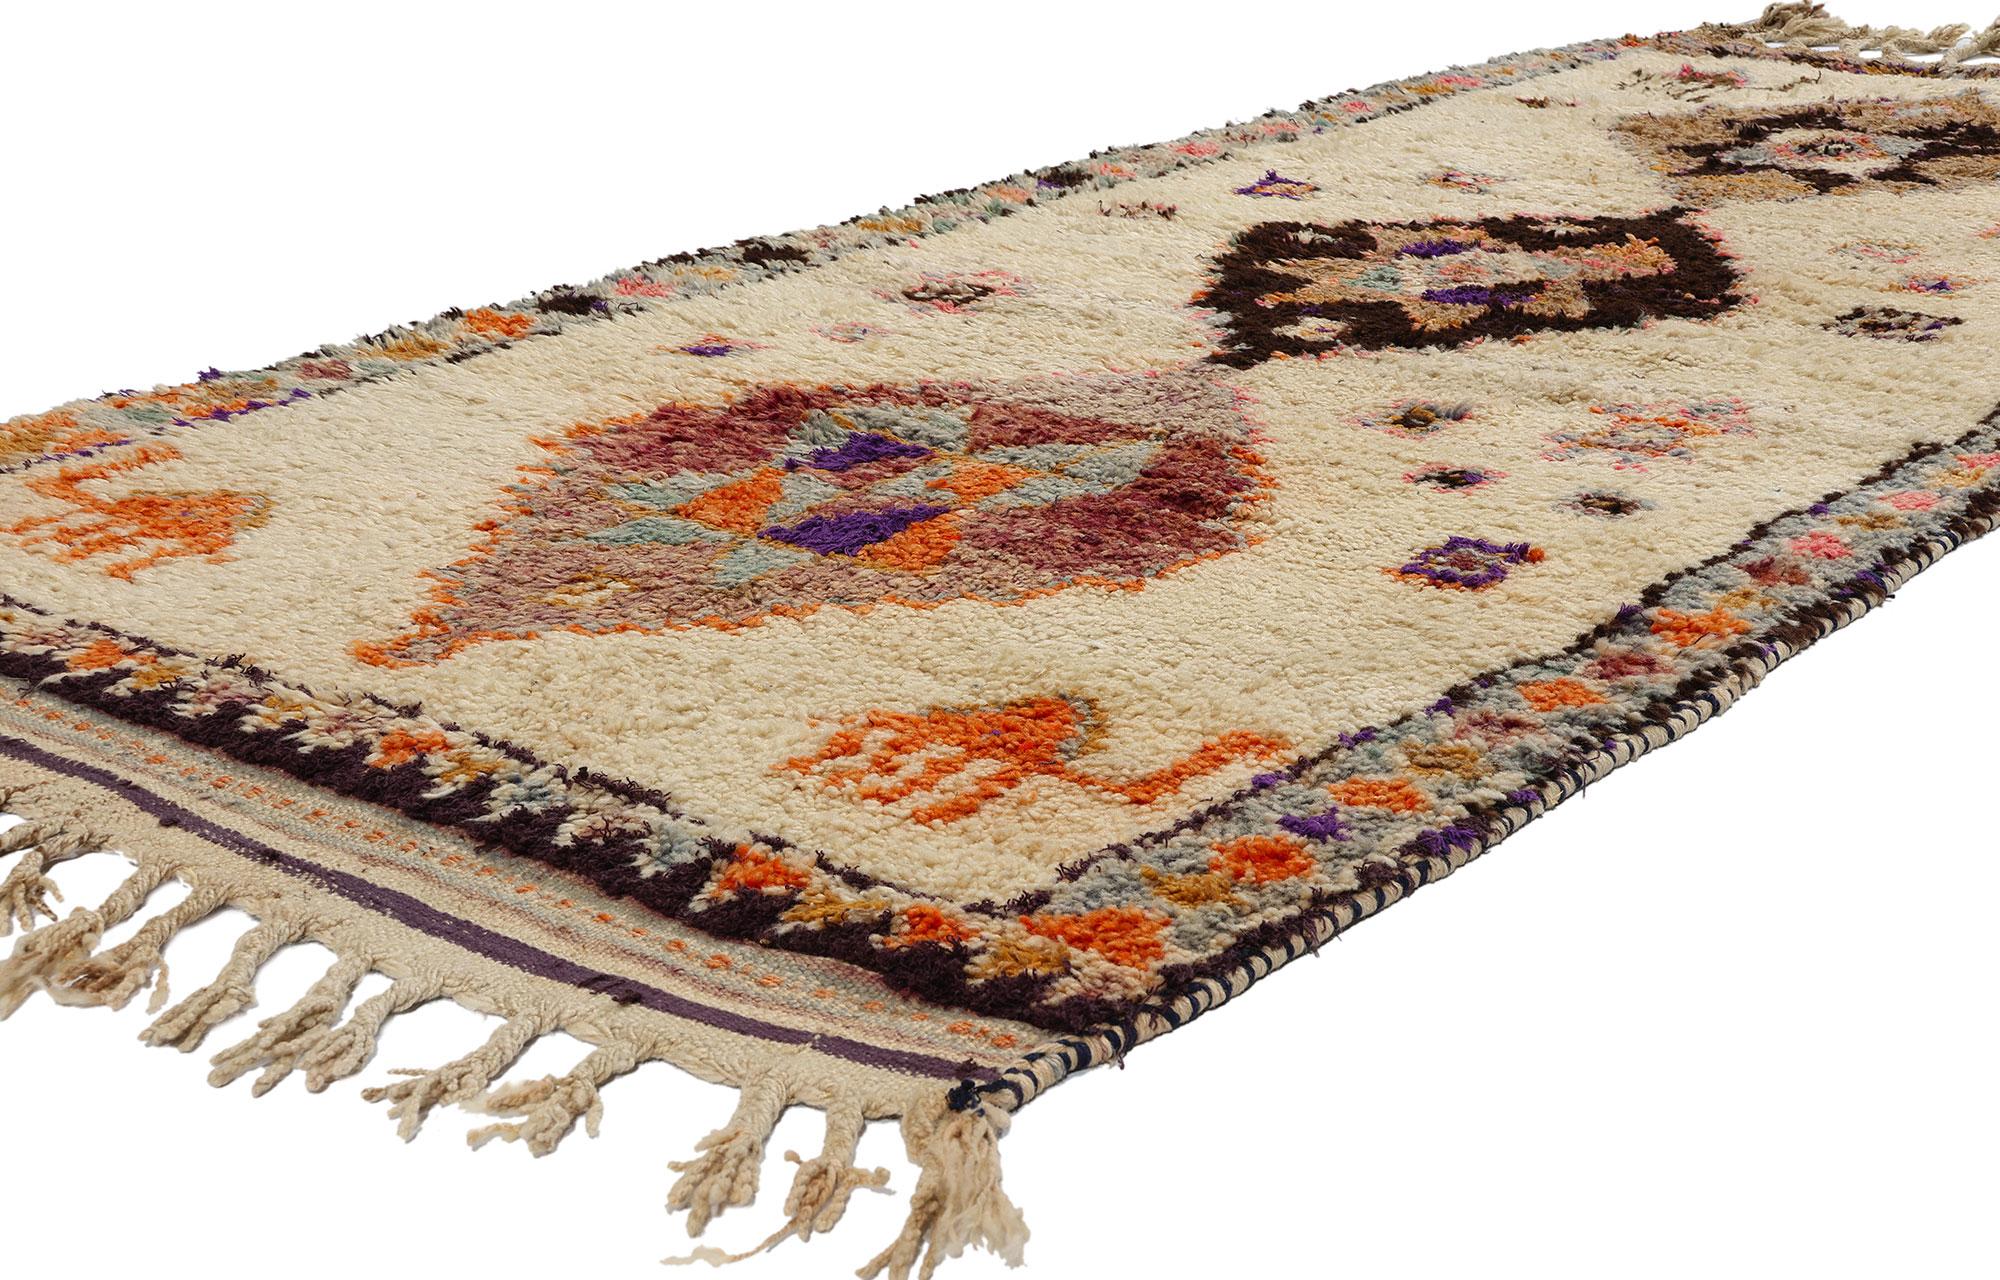 53903 Vintage Tribal Kurdish Rug Runner, 03'10 x 10'00. Handcrafted with precision by Kurdish Herki tribes in eastern Turkey, notably in the Hakkari province, Kurdish rugs stand out for their distinctive geometric patterns and lively color schemes.